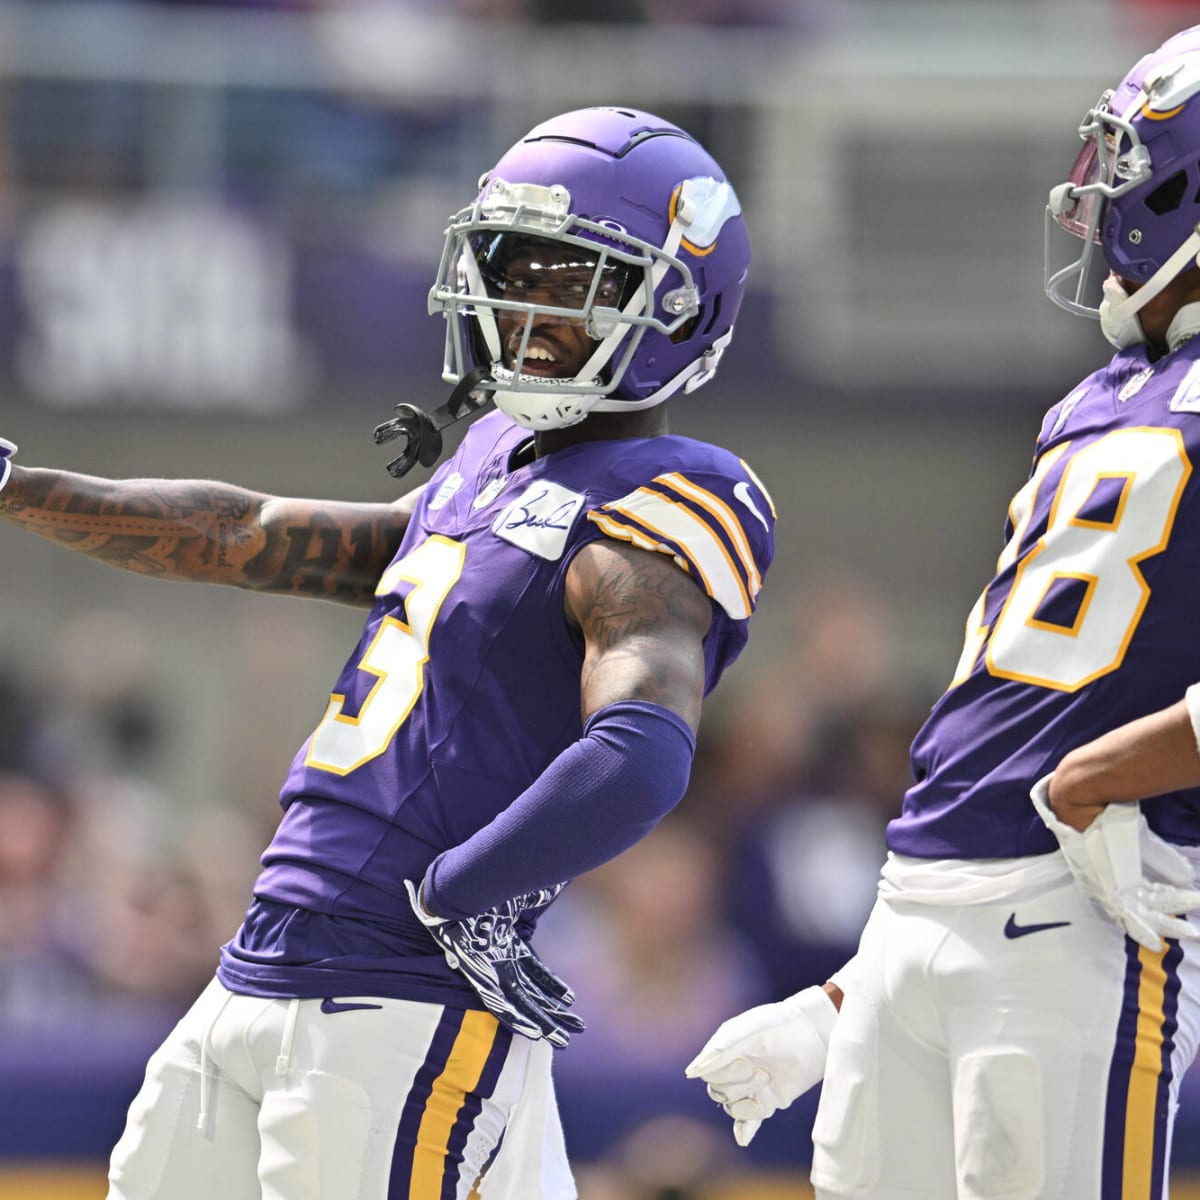 Vikings, Chargers both look to get off the schneid, grab first win, Sports